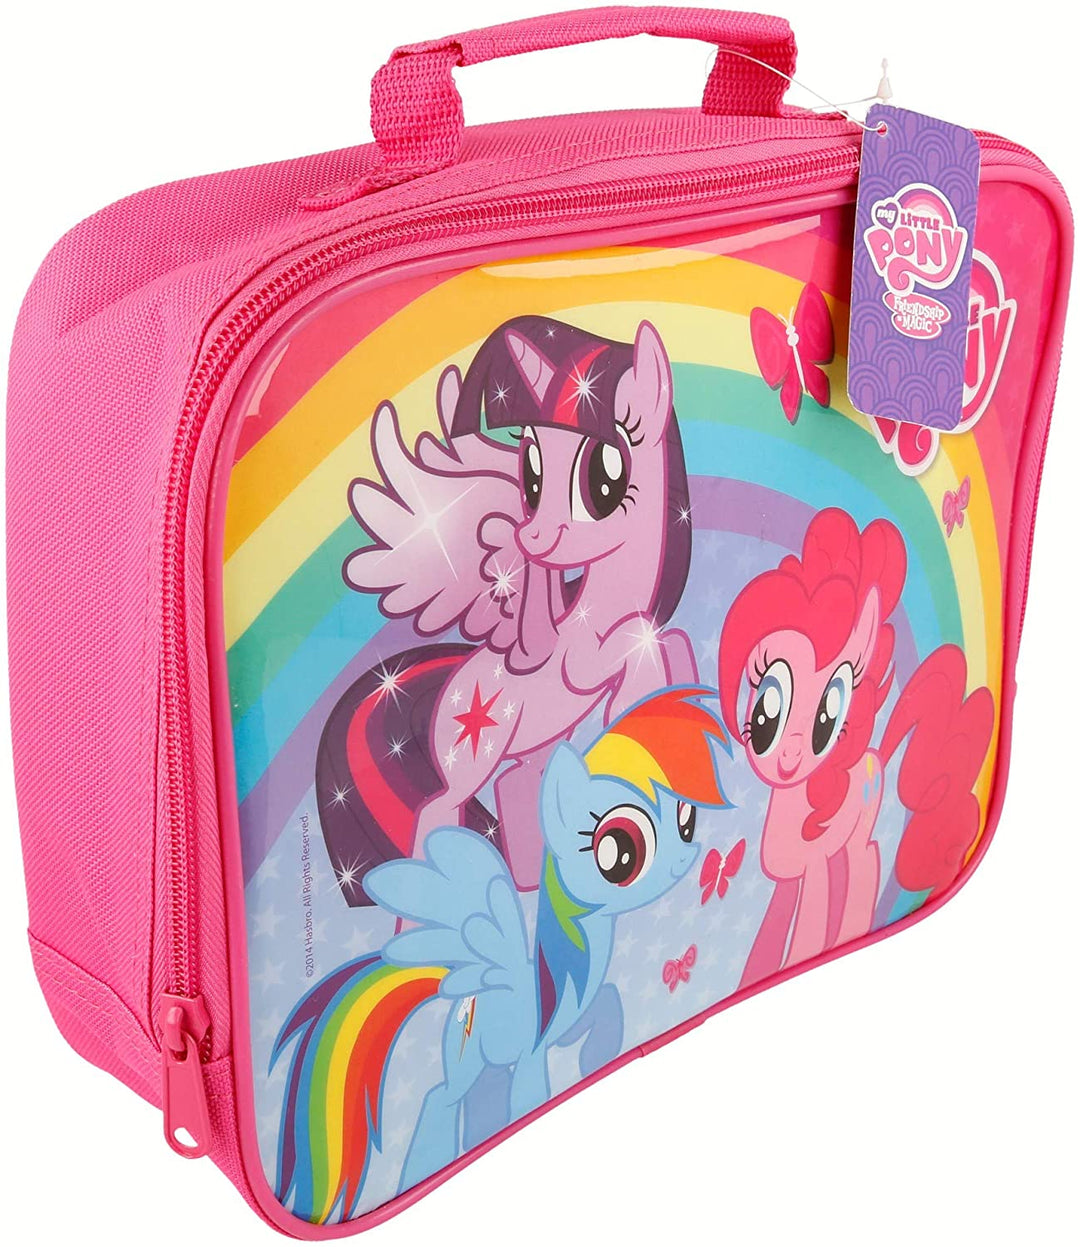 Boyz Toys ST350 Isolierte Lunchtasche – My Little Pony, Polyester, Pink, 7 x 21 x 26 cm